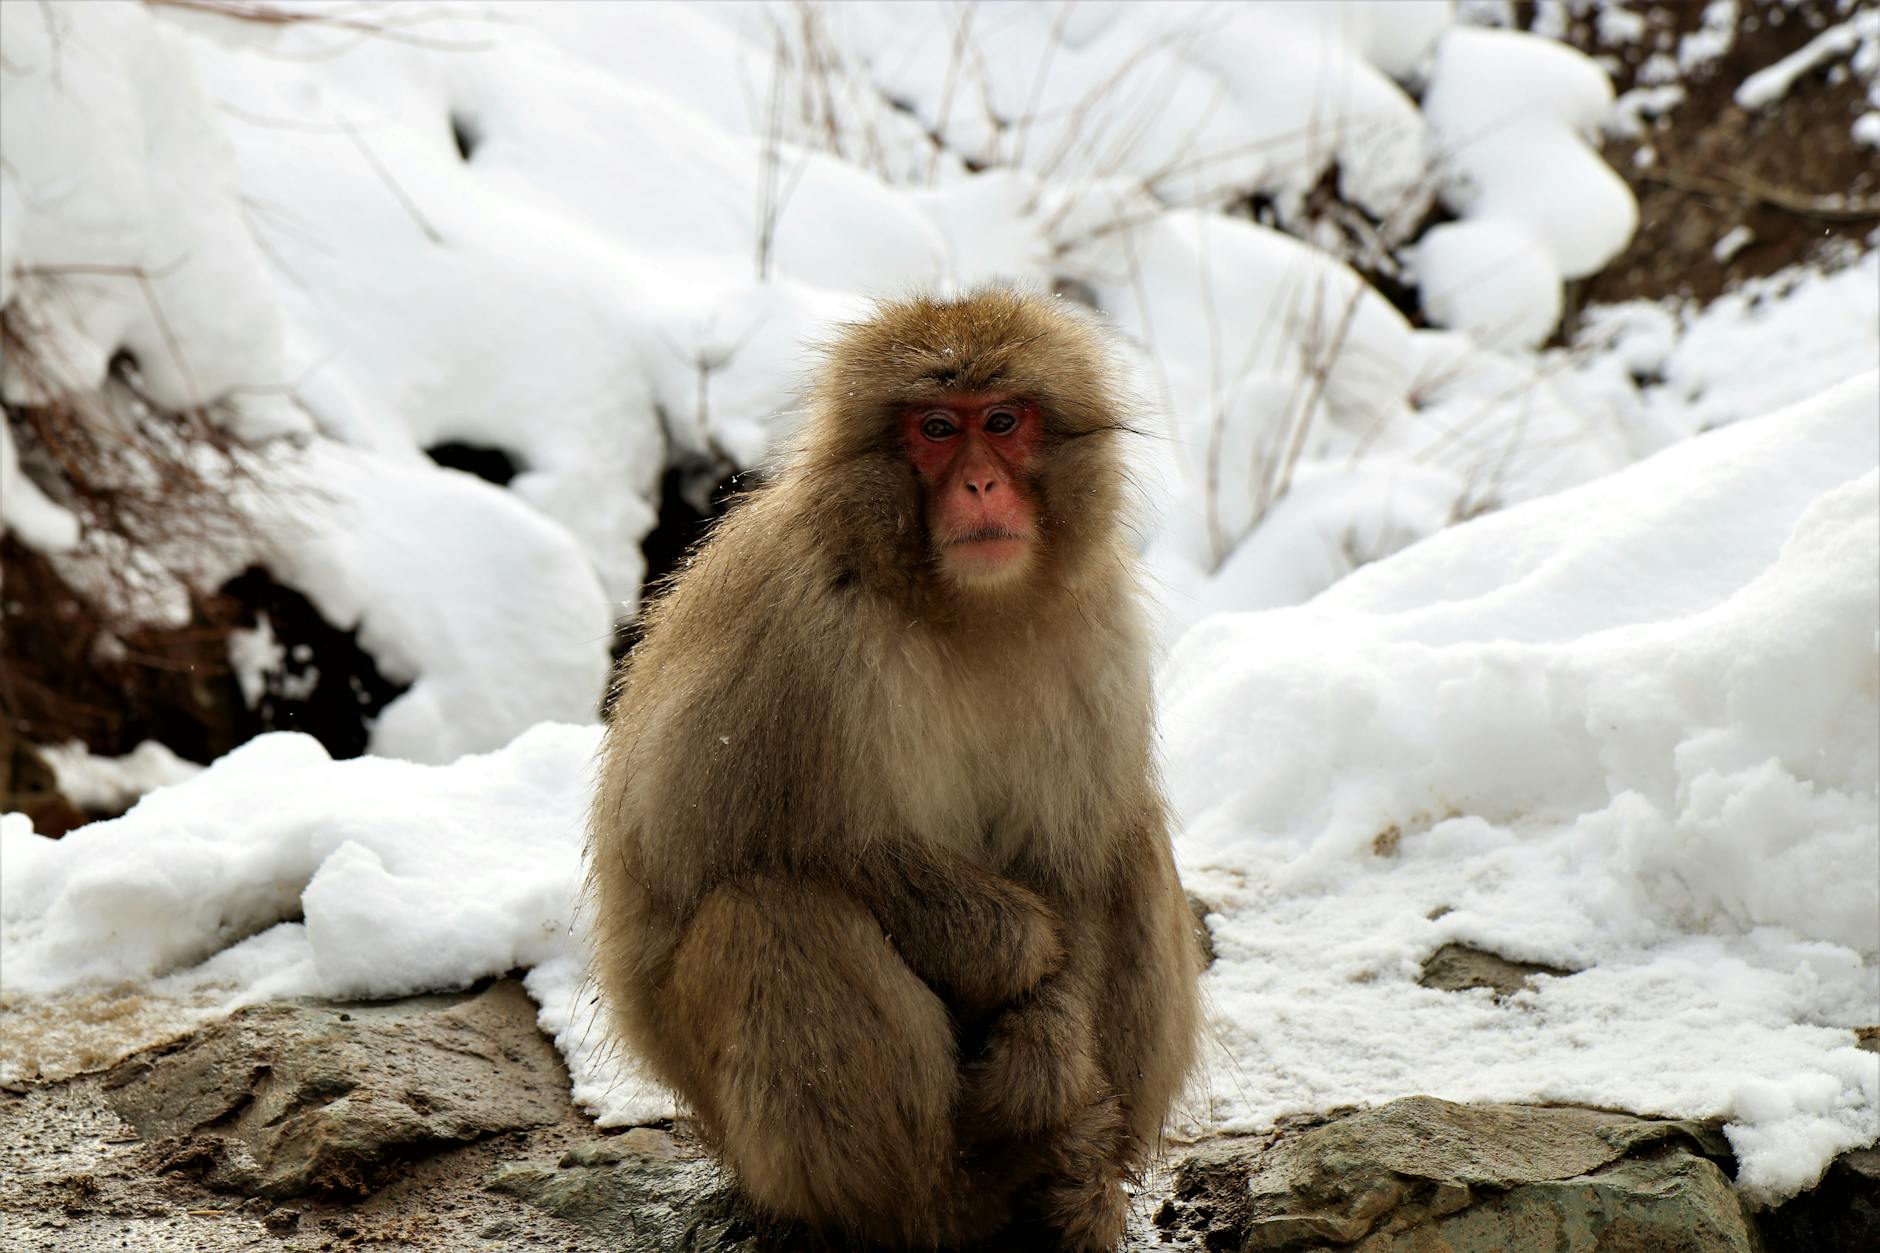 Japanese Macaque with Fluffy Fur Resting on Stones Near Snow